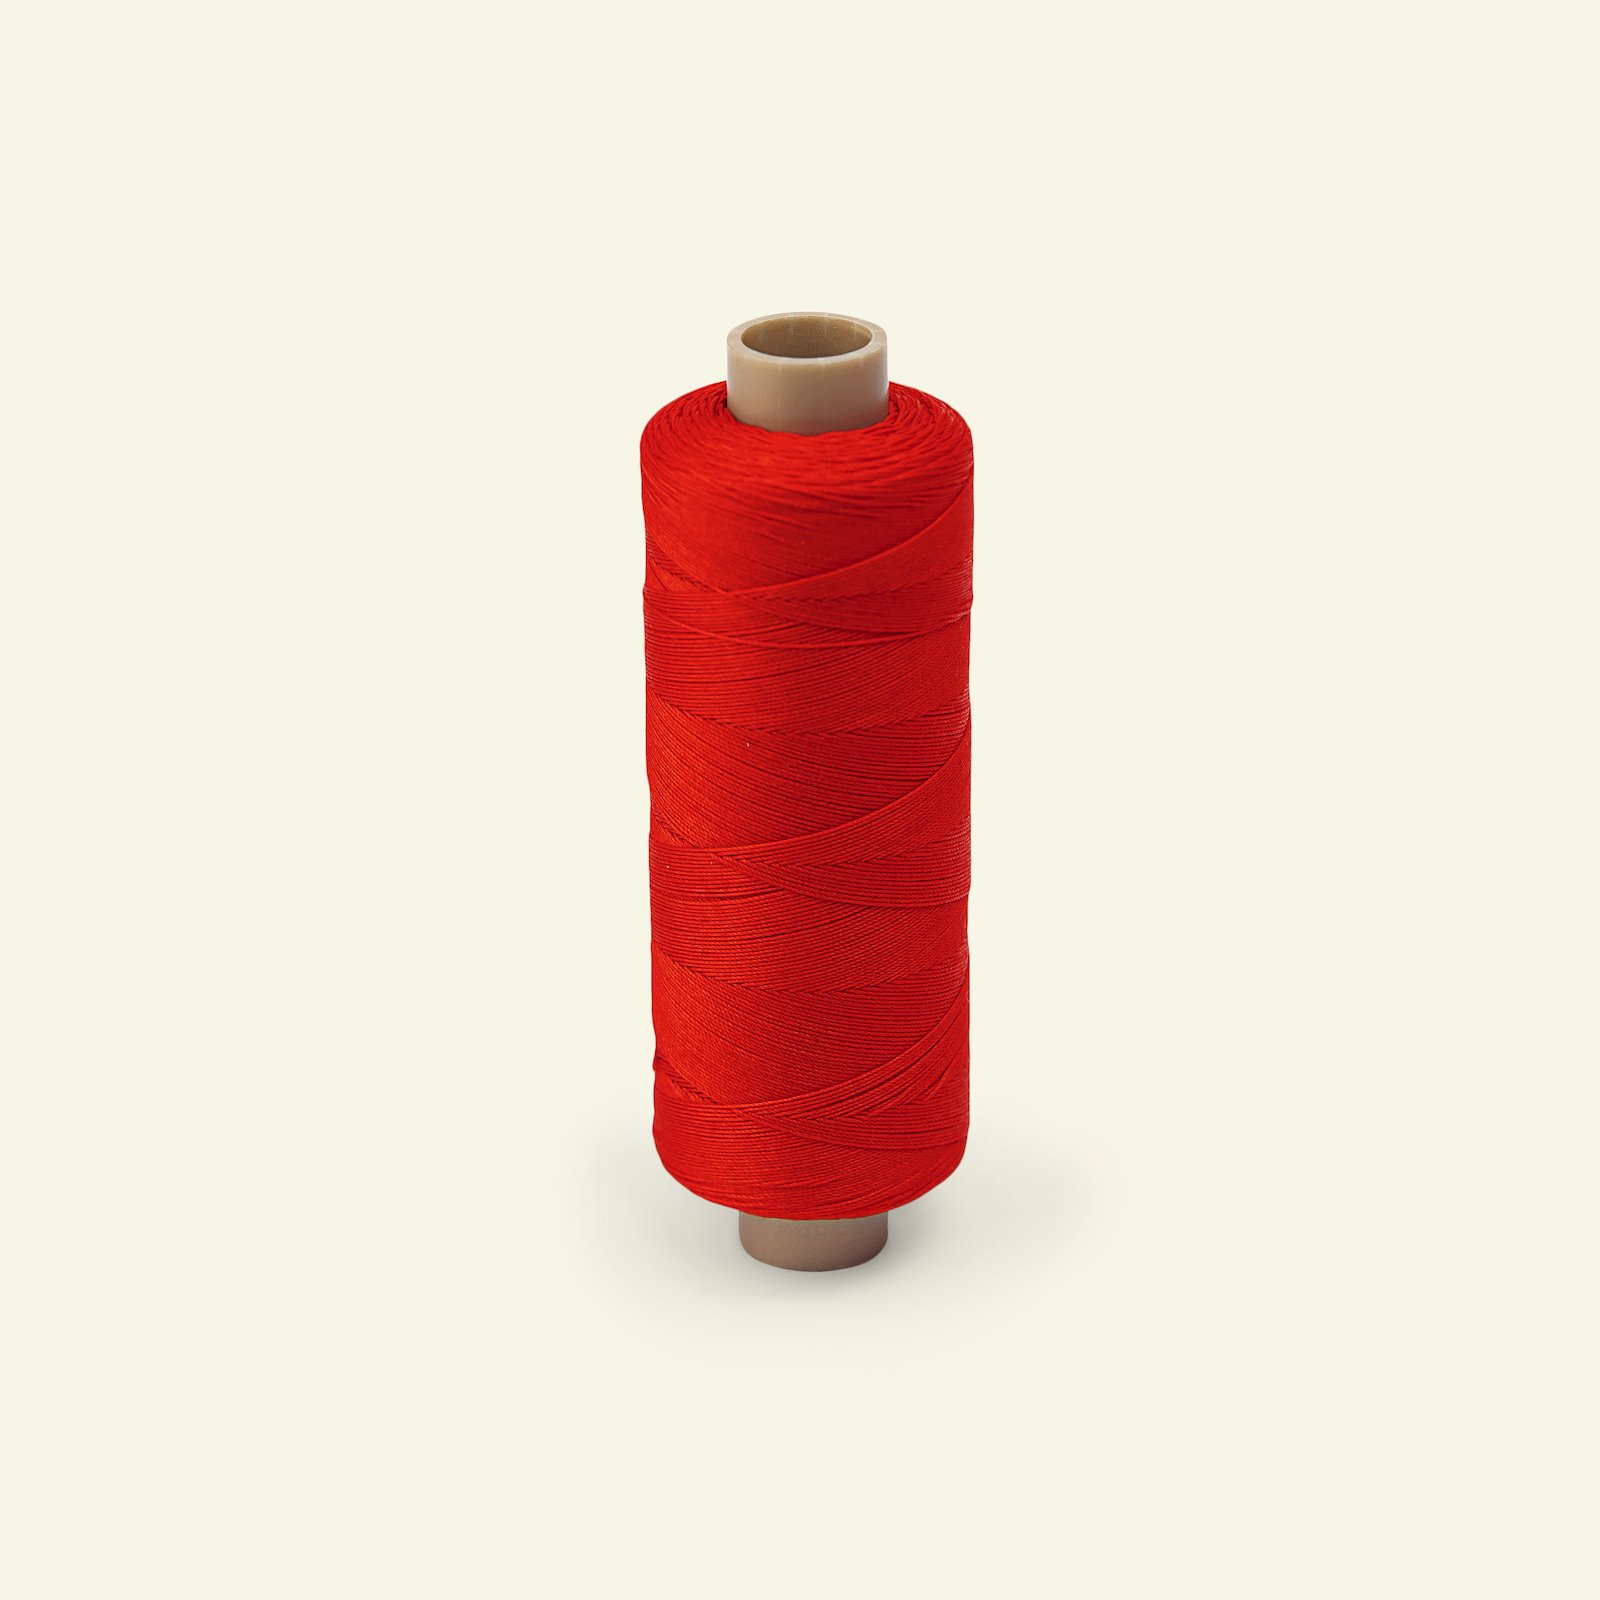 Quiltgarn Rot 300m 19011_pack